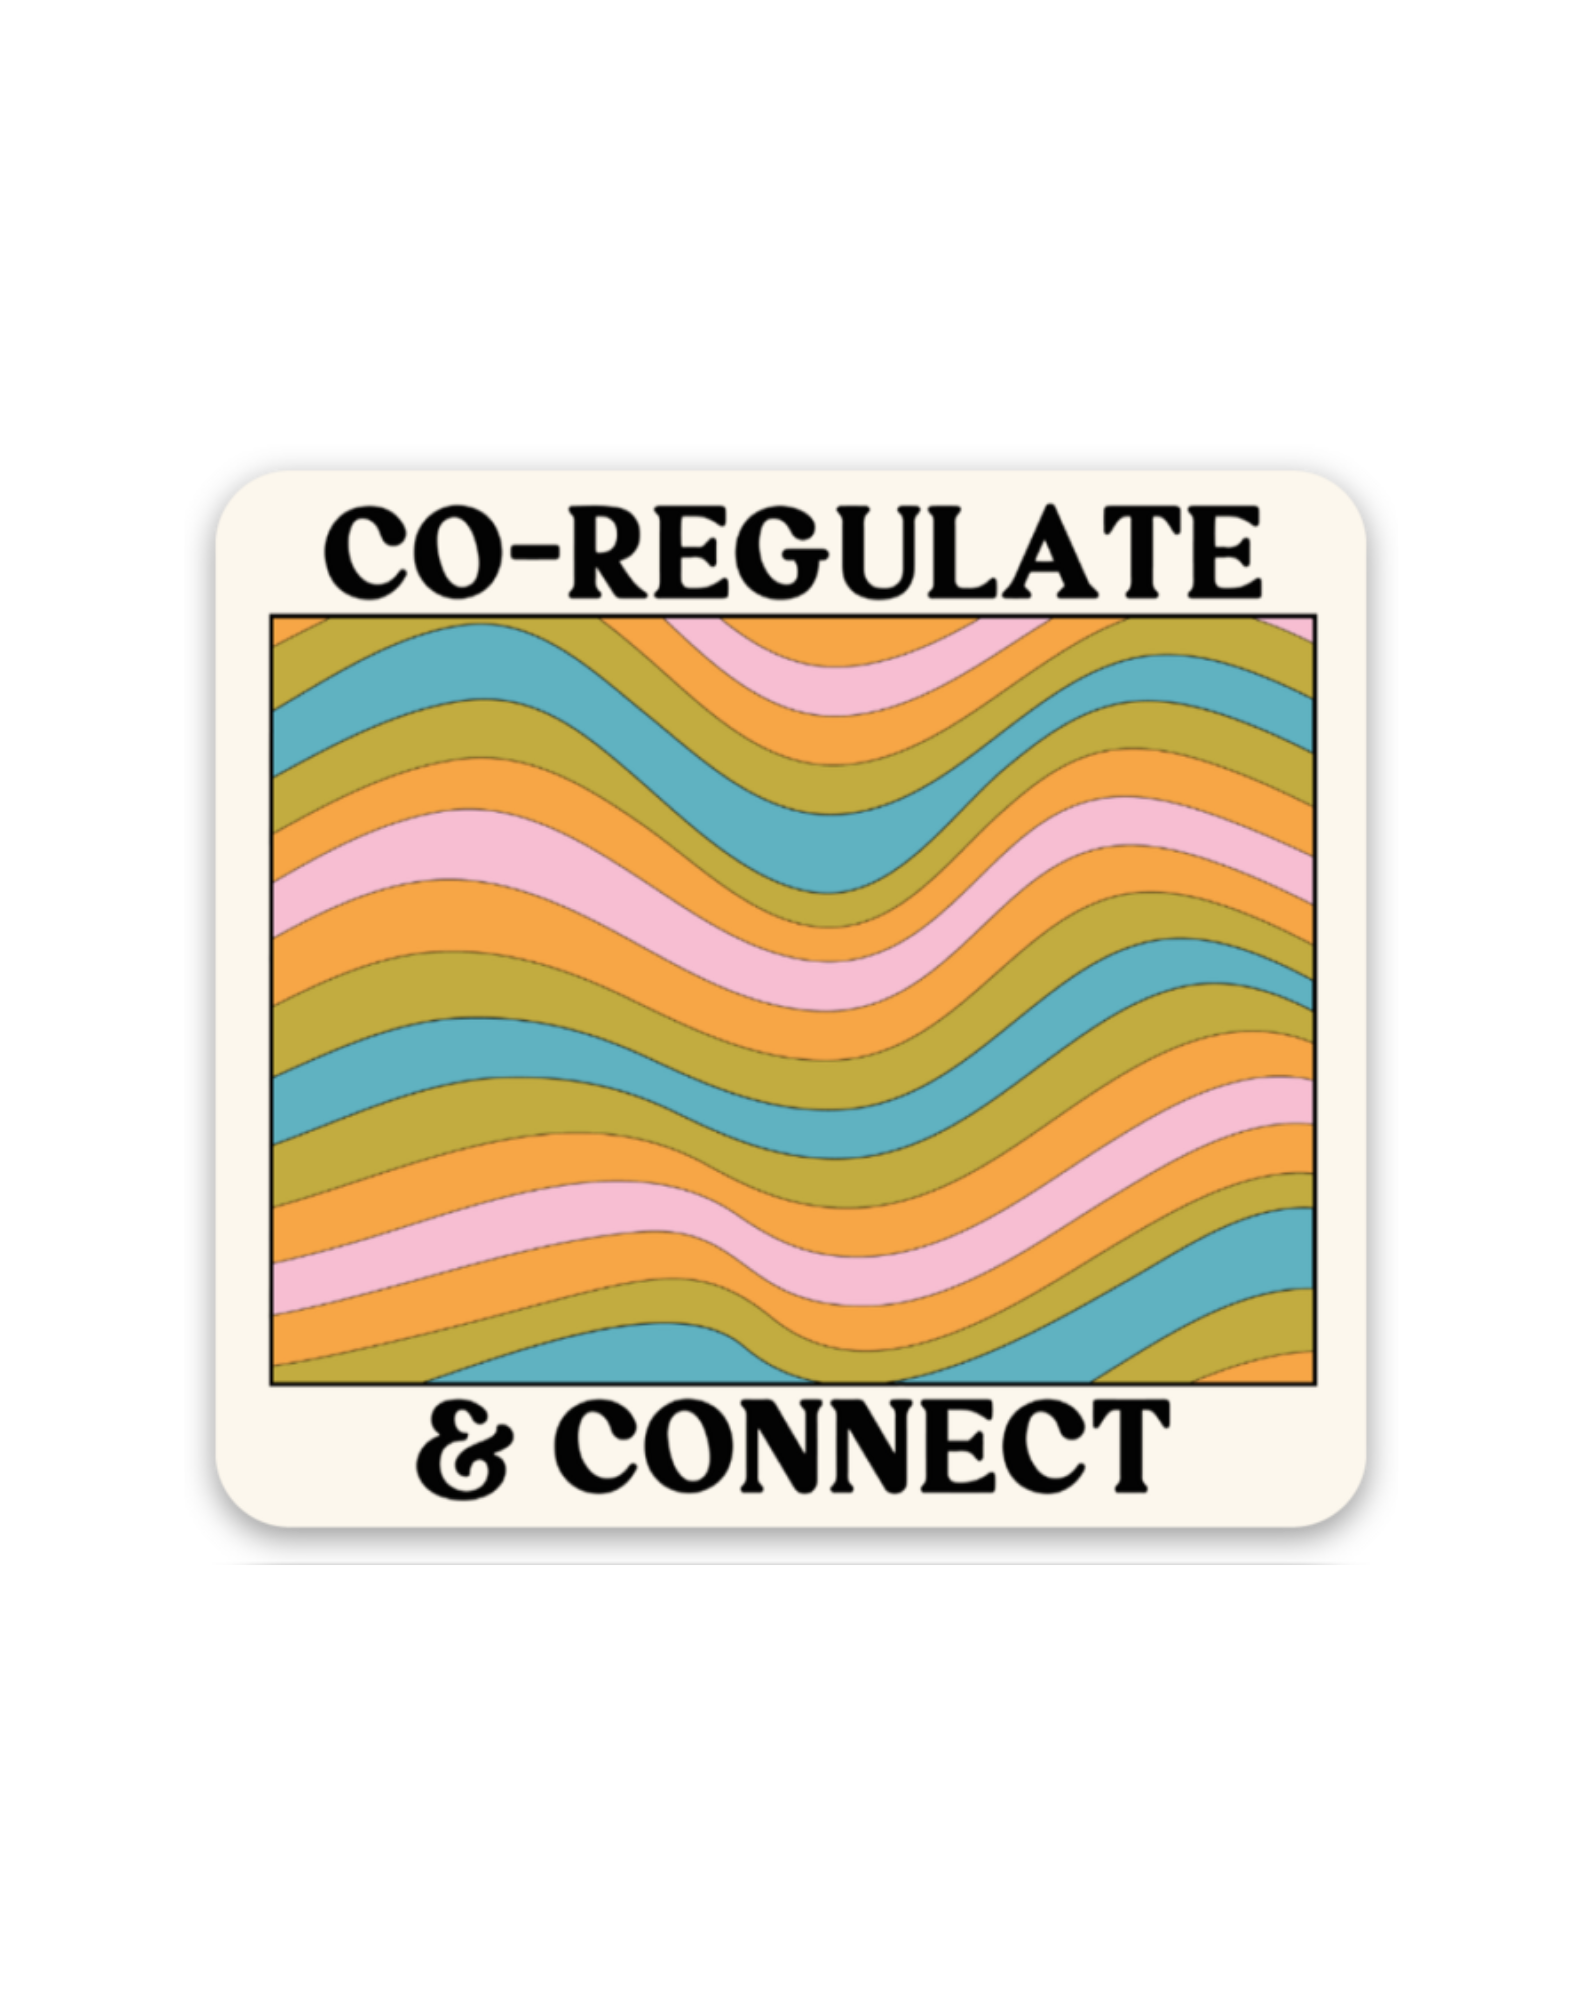 Co-Regulate & Connect Sticker